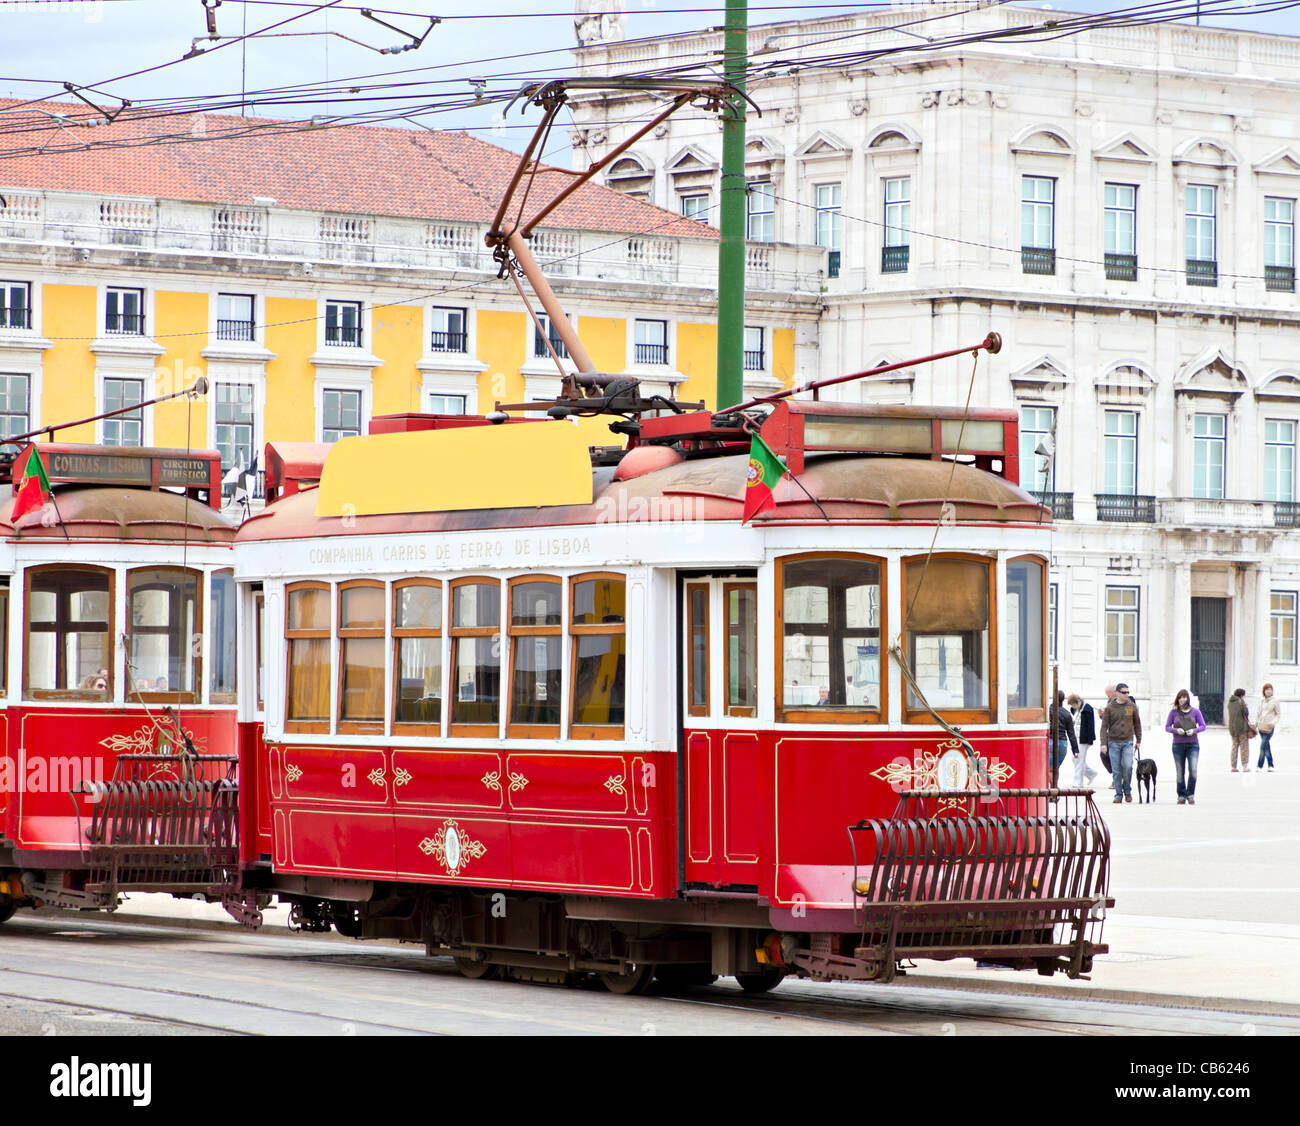 historic classic red tram of Lisbon built partially of wood in front of Lisbons central square Praca de Comercio, Portugal Stock Photo